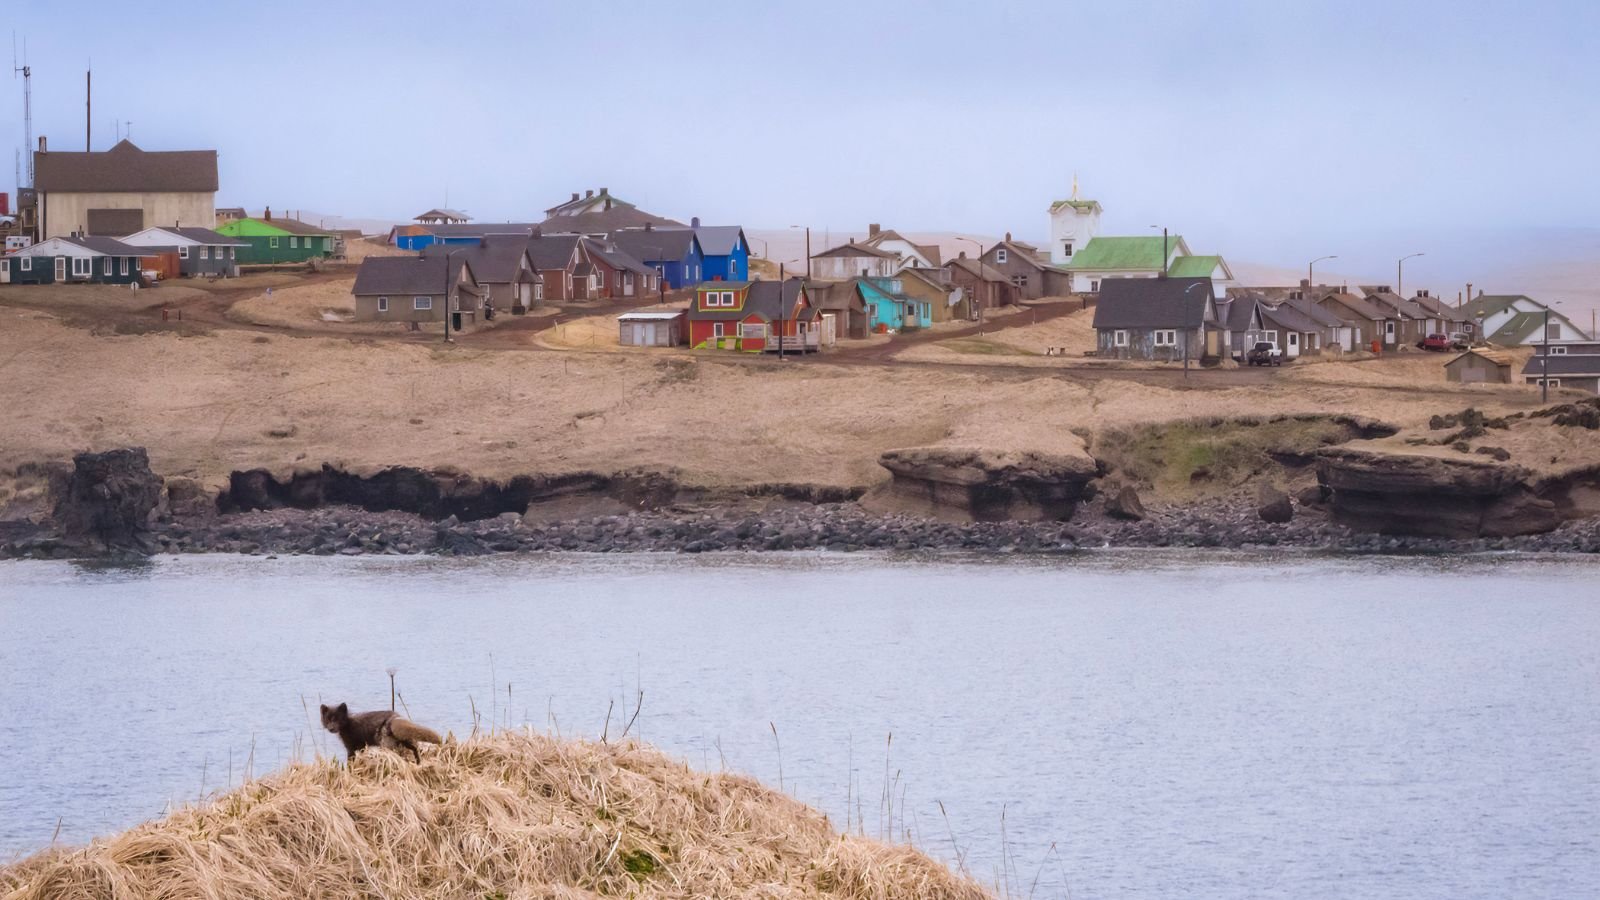 Photo of St. Paul Island, with houses and small animal